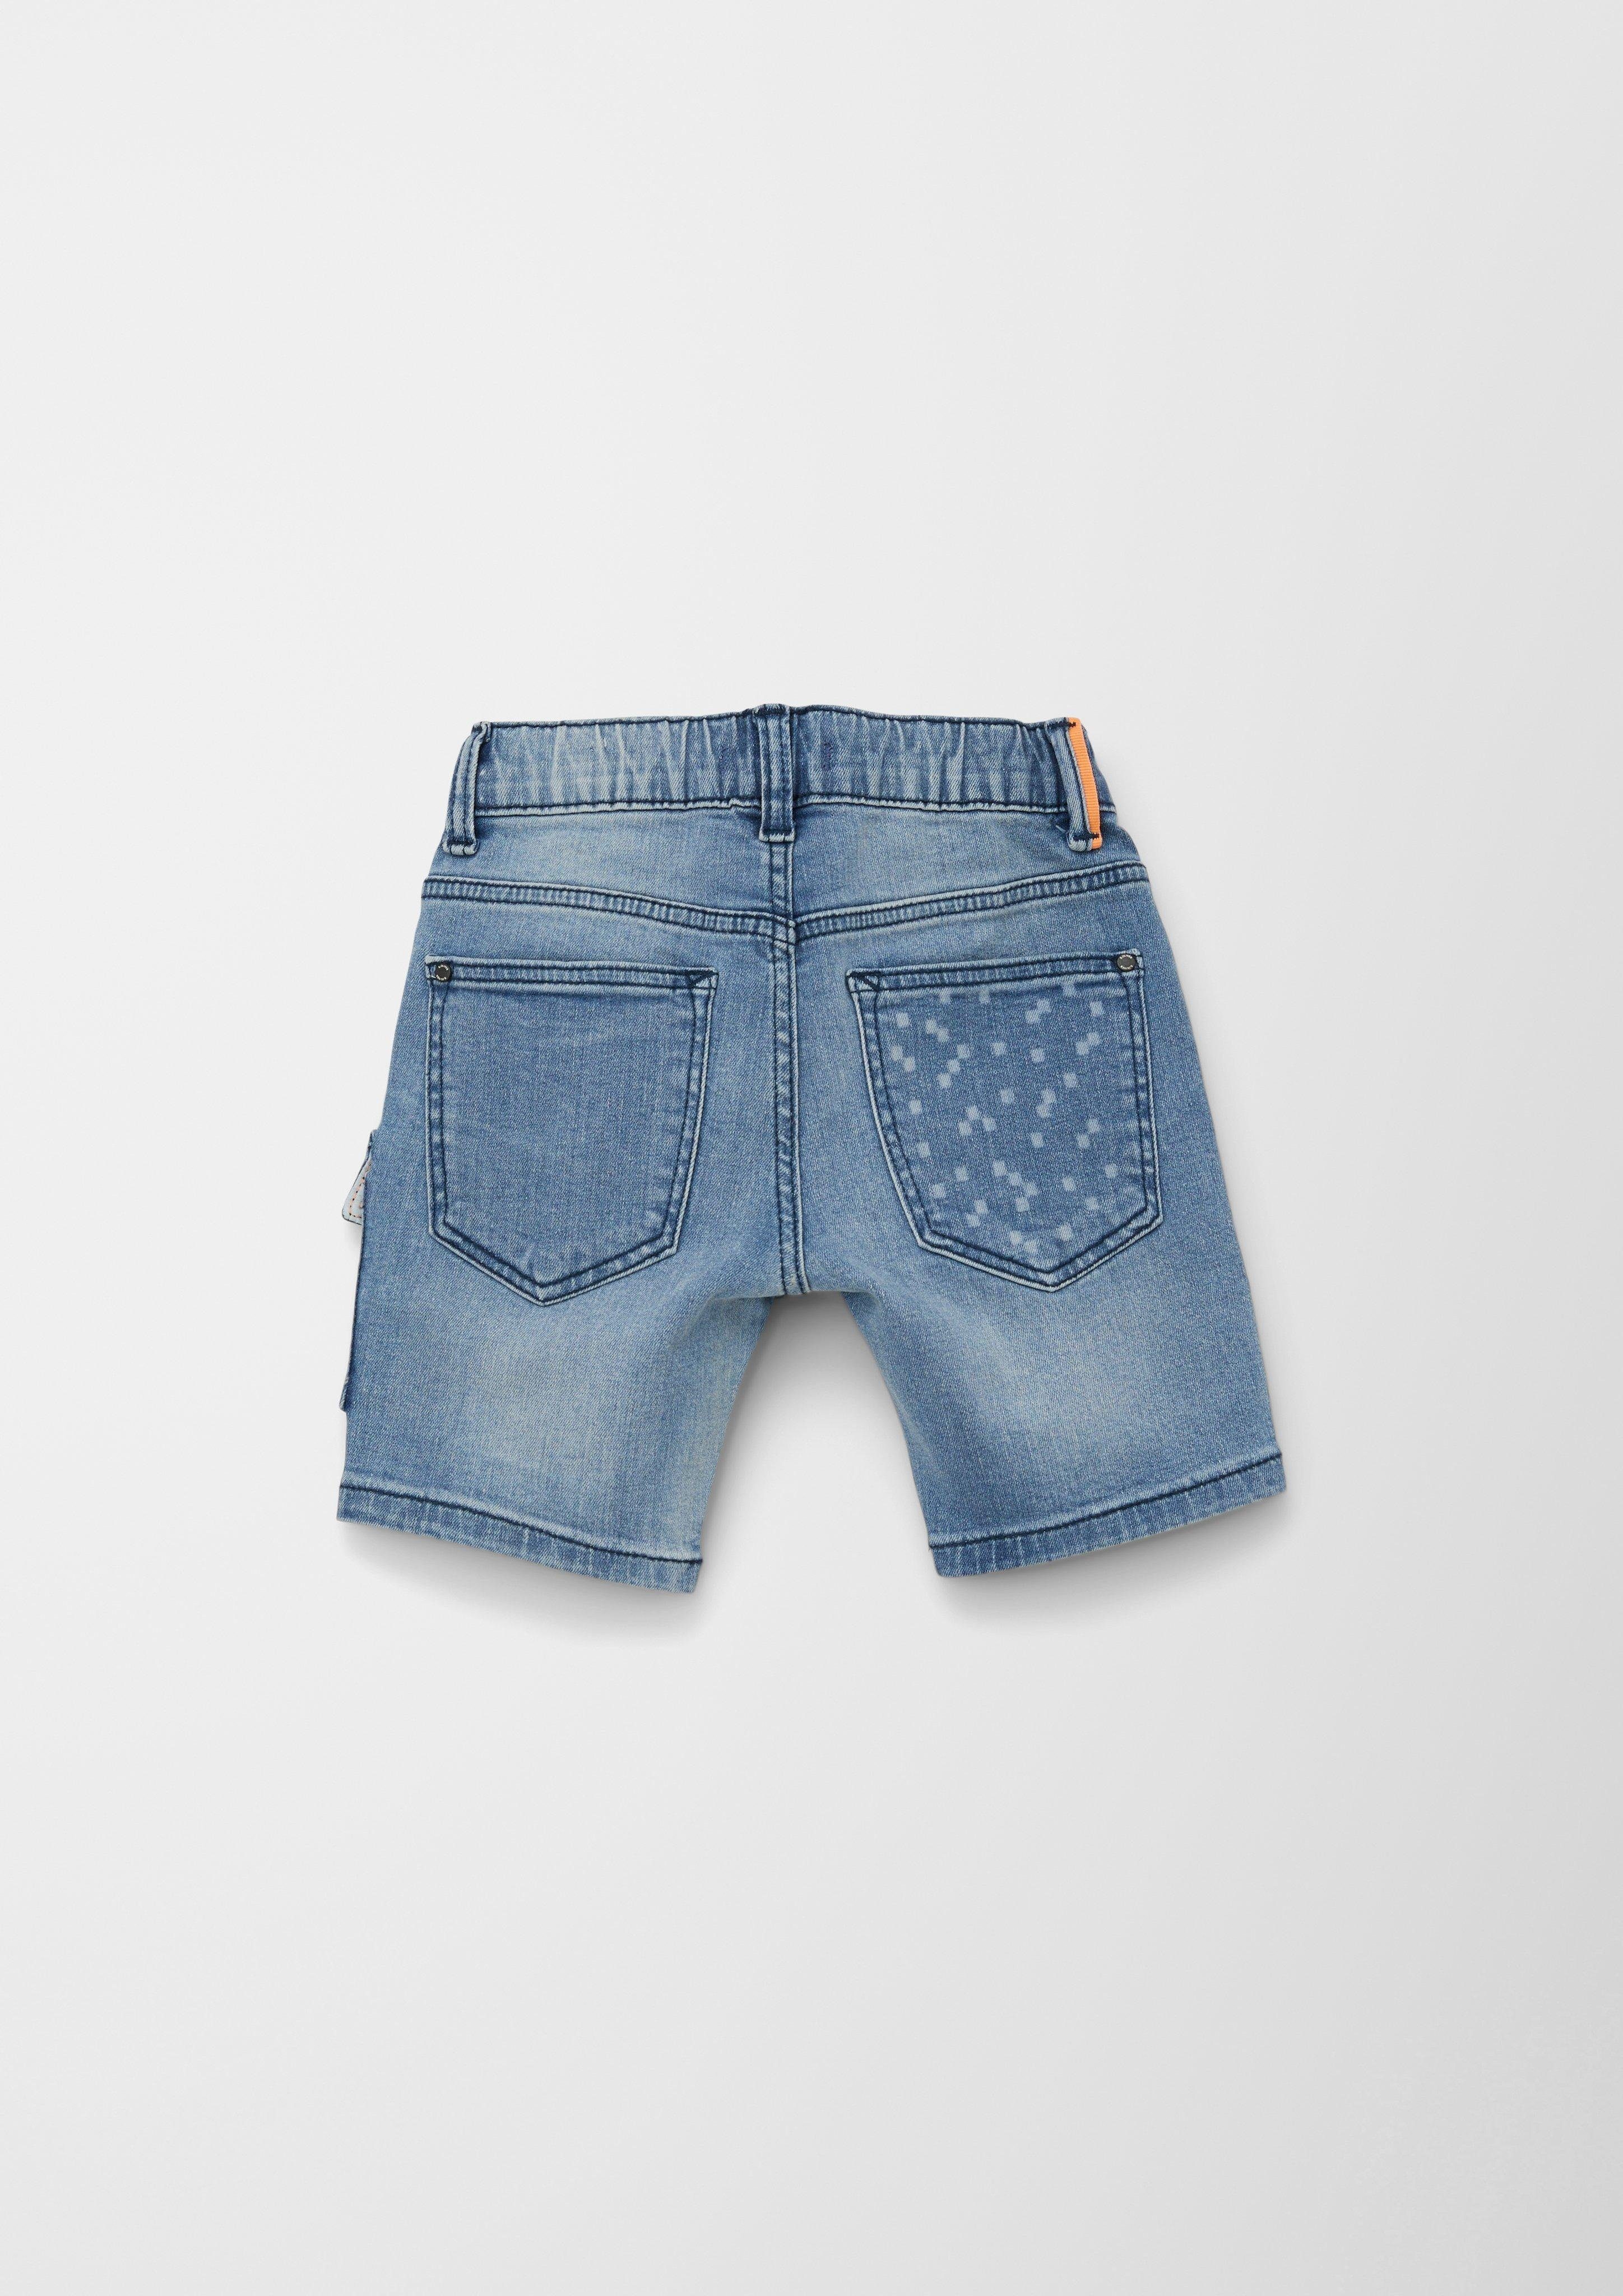 Leg angedeuteter / Slim Waschung / Brad Jeansshorts Mid / s.Oliver Rise Fit Tunnelzug, Jeans-Bermuda Slim Joggstyle